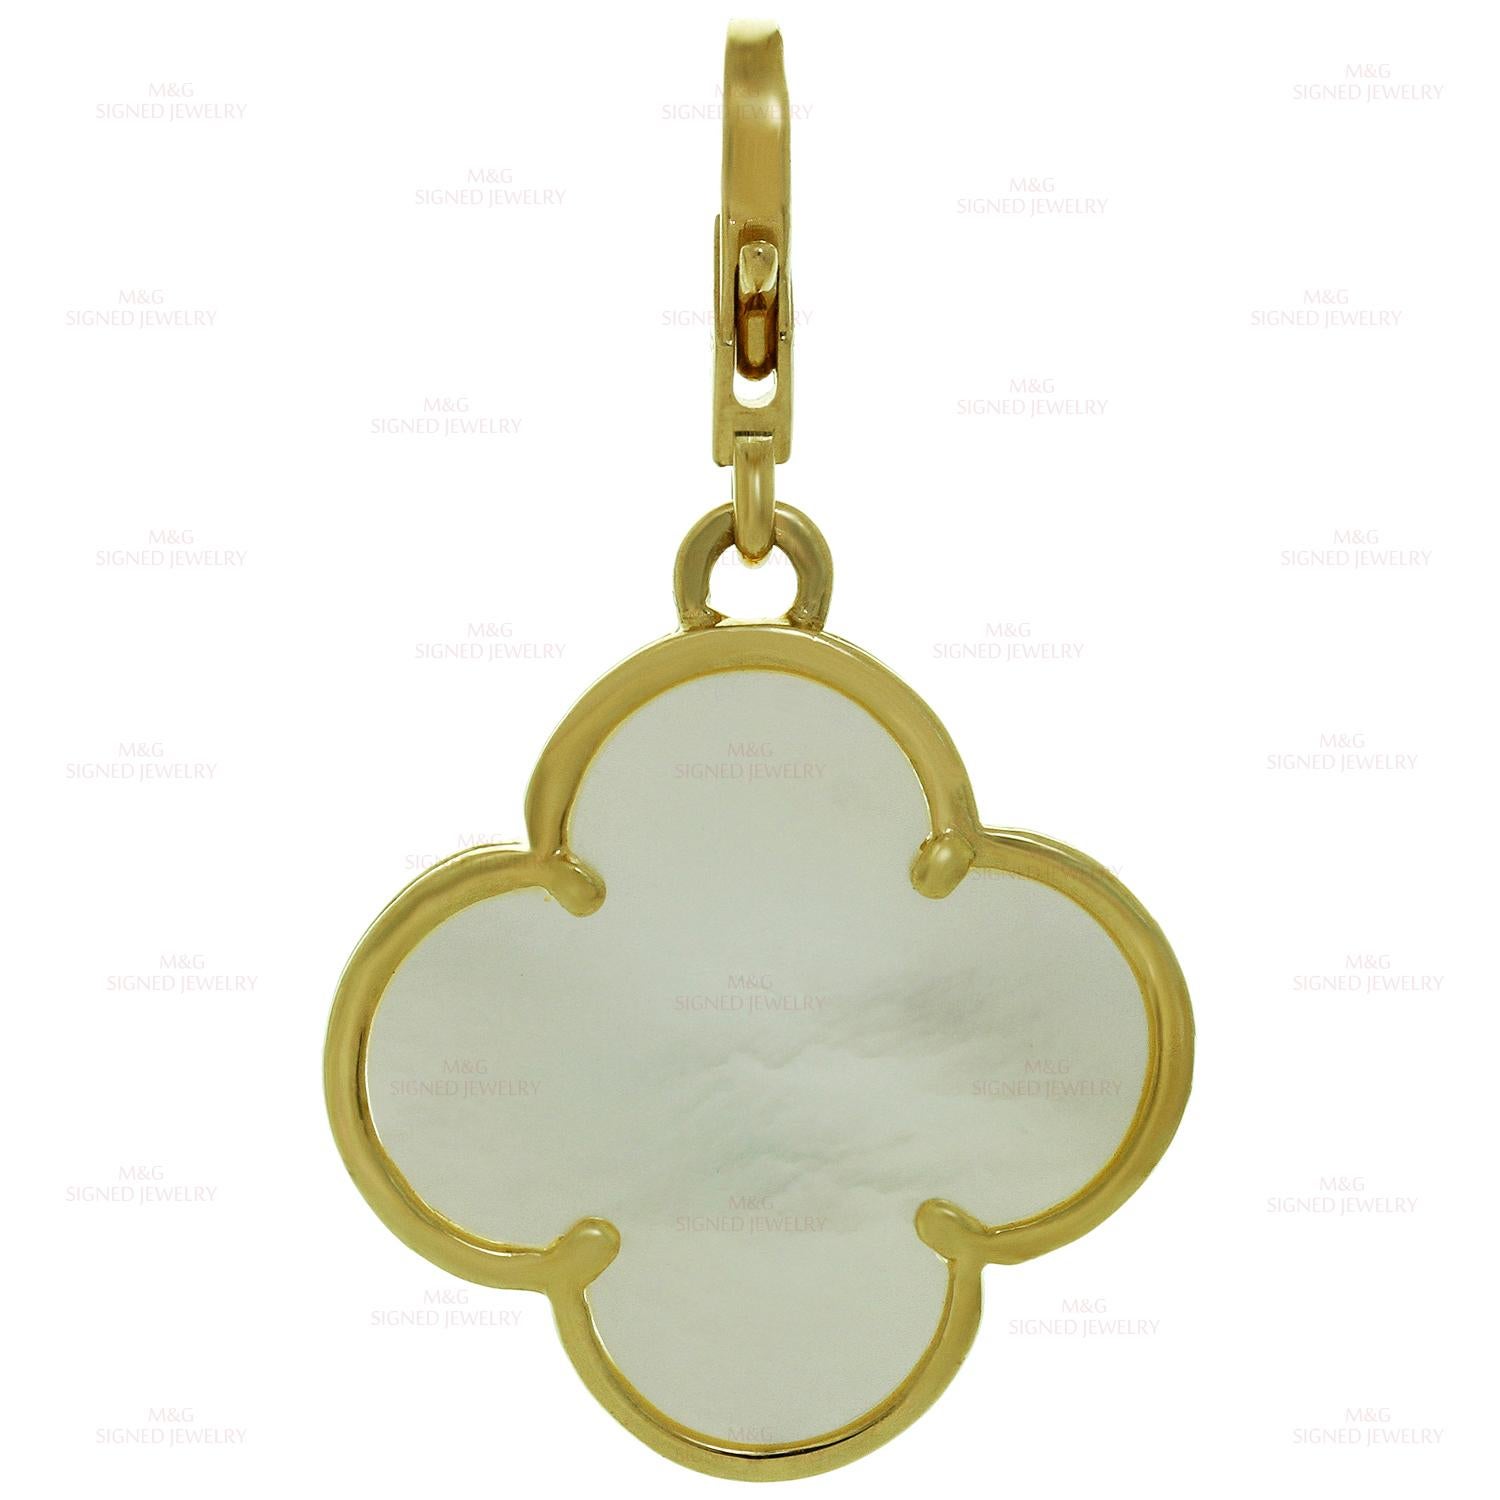 This iconic Van Cleef & Arpels Alhambra pendant features the festive lucky clover design crafted in 18k yellow gold and inlaid with mother-of-pearl. Made in France. Measurements: 0.86